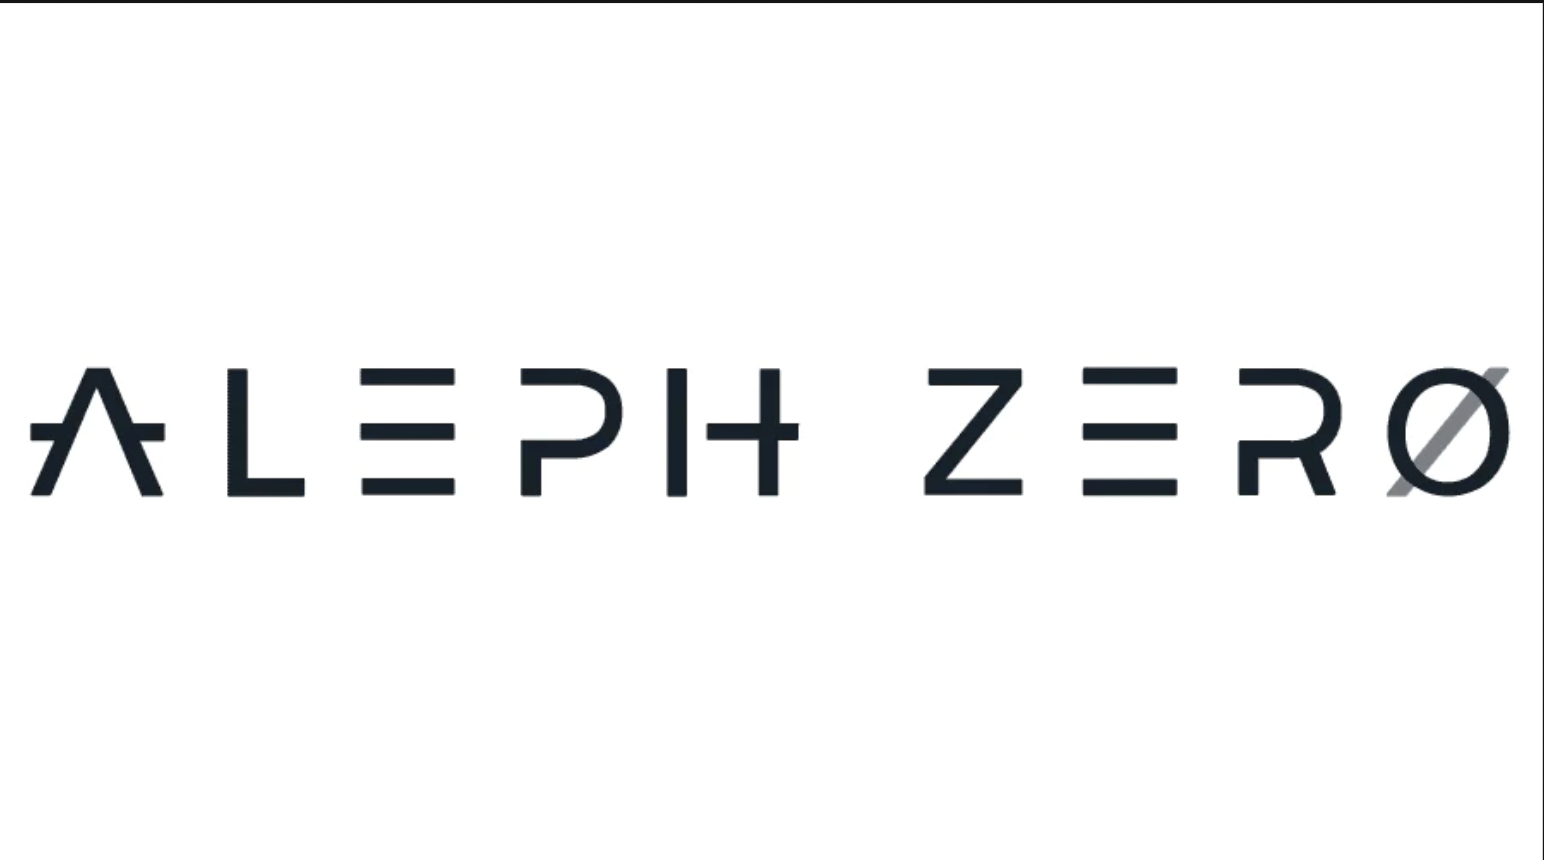 The Aleph Zero ecosystem consists of a web of interconnected projects, initiatives & partnerships that are dedicated to build the Web3 future.